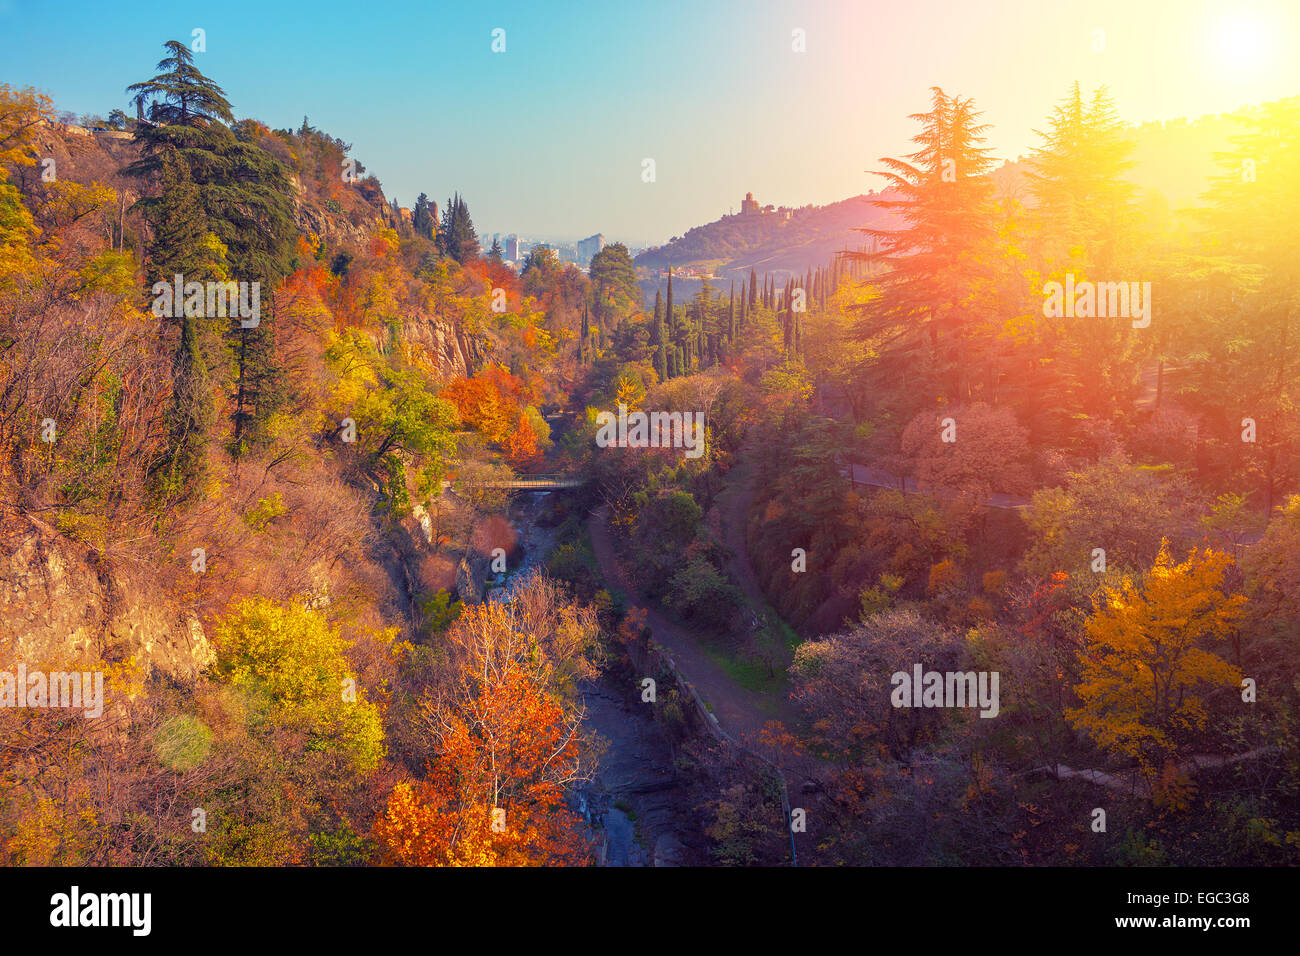 Botanical garden at sunset in Tbilisi city, Georgia country Stock Photo